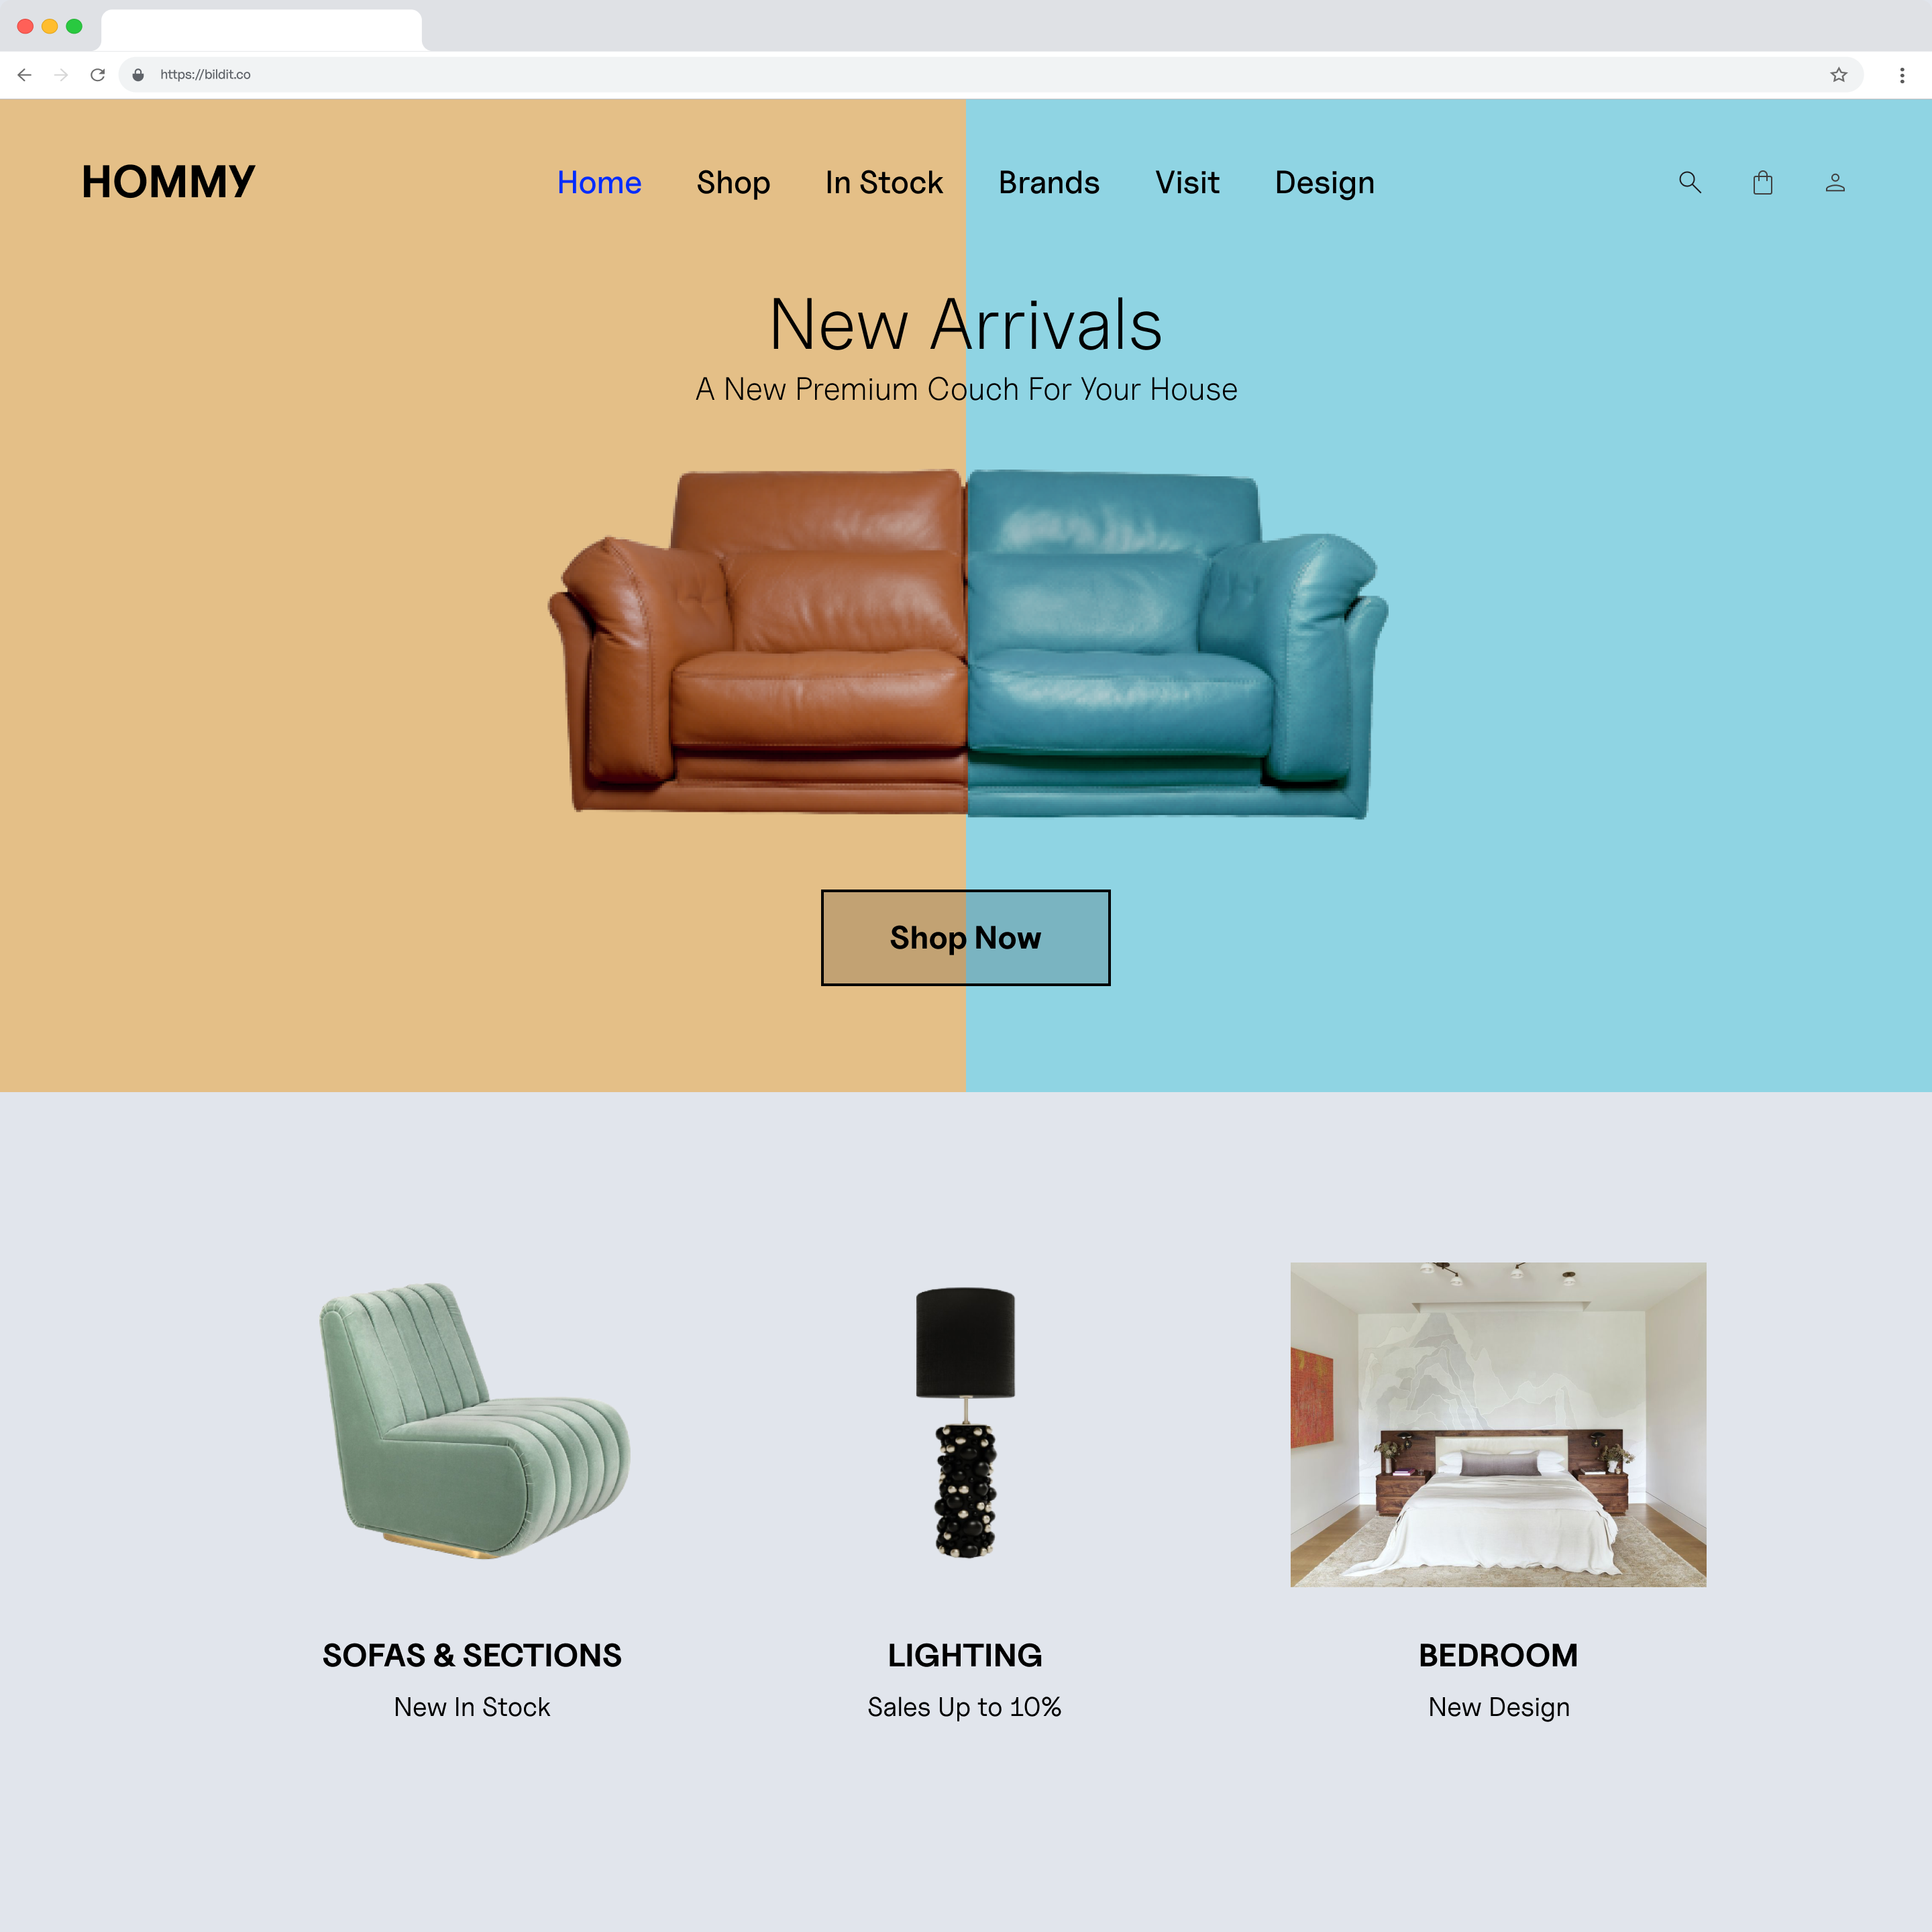 The image features a webpage for 'HOMMY', a home furnishings store, showcasing 'New Arrivals' with a central banner of side-by-side images of a brown and a blue couch against a two-tone background. Below the banner are three images: a green armchair labeled 'SOFAS & SECTIONS', a black lamp labeled 'LIGHTING', and a bedroom setup labeled 'BEDROOM'. Navigation links such as Home, Shop, In Stock, Brands, Visit, and Design are at the top, with a search bar and user account options.